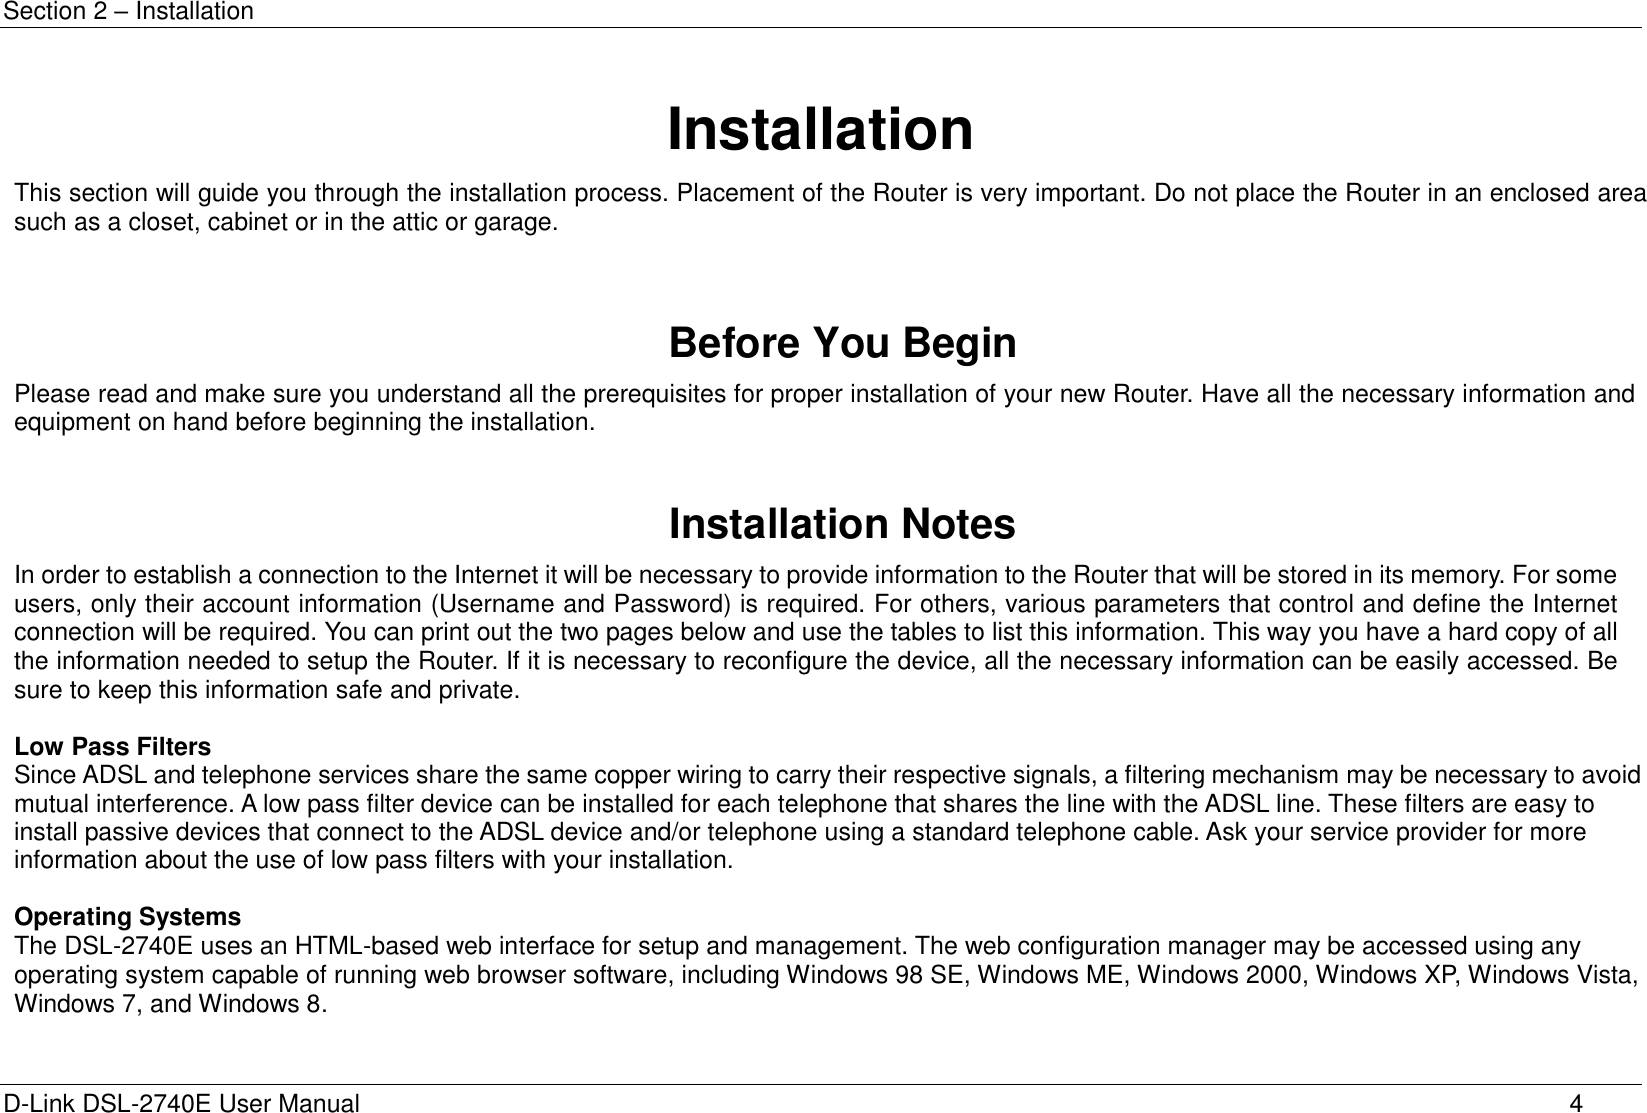 Section 2 – Installation D-Link DSL-2740E User Manual 4 Installation This section will guide you through the installation process. Placement of the Router is very important. Do not place the Router in an enclosed area such as a closet, cabinet or in the attic or garage.    Before You Begin Please read and make sure you understand all the prerequisites for proper installation of your new Router. Have all the necessary information and equipment on hand before beginning the installation.   Installation Notes In order to establish a connection to the Internet it will be necessary to provide information to the Router that will be stored in its memory. For some users, only their account information (Username and Password) is required. For others, various parameters that control and define the Internet connection will be required. You can print out the two pages below and use the tables to list this information. This way you have a hard copy of all the information needed to setup the Router. If it is necessary to reconfigure the device, all the necessary information can be easily accessed. Be sure to keep this information safe and private.  Low Pass Filters Since ADSL and telephone services share the same copper wiring to carry their respective signals, a filtering mechanism may be necessary to avoid mutual interference. A low pass filter device can be installed for each telephone that shares the line with the ADSL line. These filters are easy to install passive devices that connect to the ADSL device and/or telephone using a standard telephone cable. Ask your service provider for more information about the use of low pass filters with your installation.  Operating Systems The DSL-2740E uses an HTML-based web interface for setup and management. The web configuration manager may be accessed using any operating system capable of running web browser software, including Windows 98 SE, Windows ME, Windows 2000, Windows XP, Windows Vista, Windows 7, and Windows 8.  